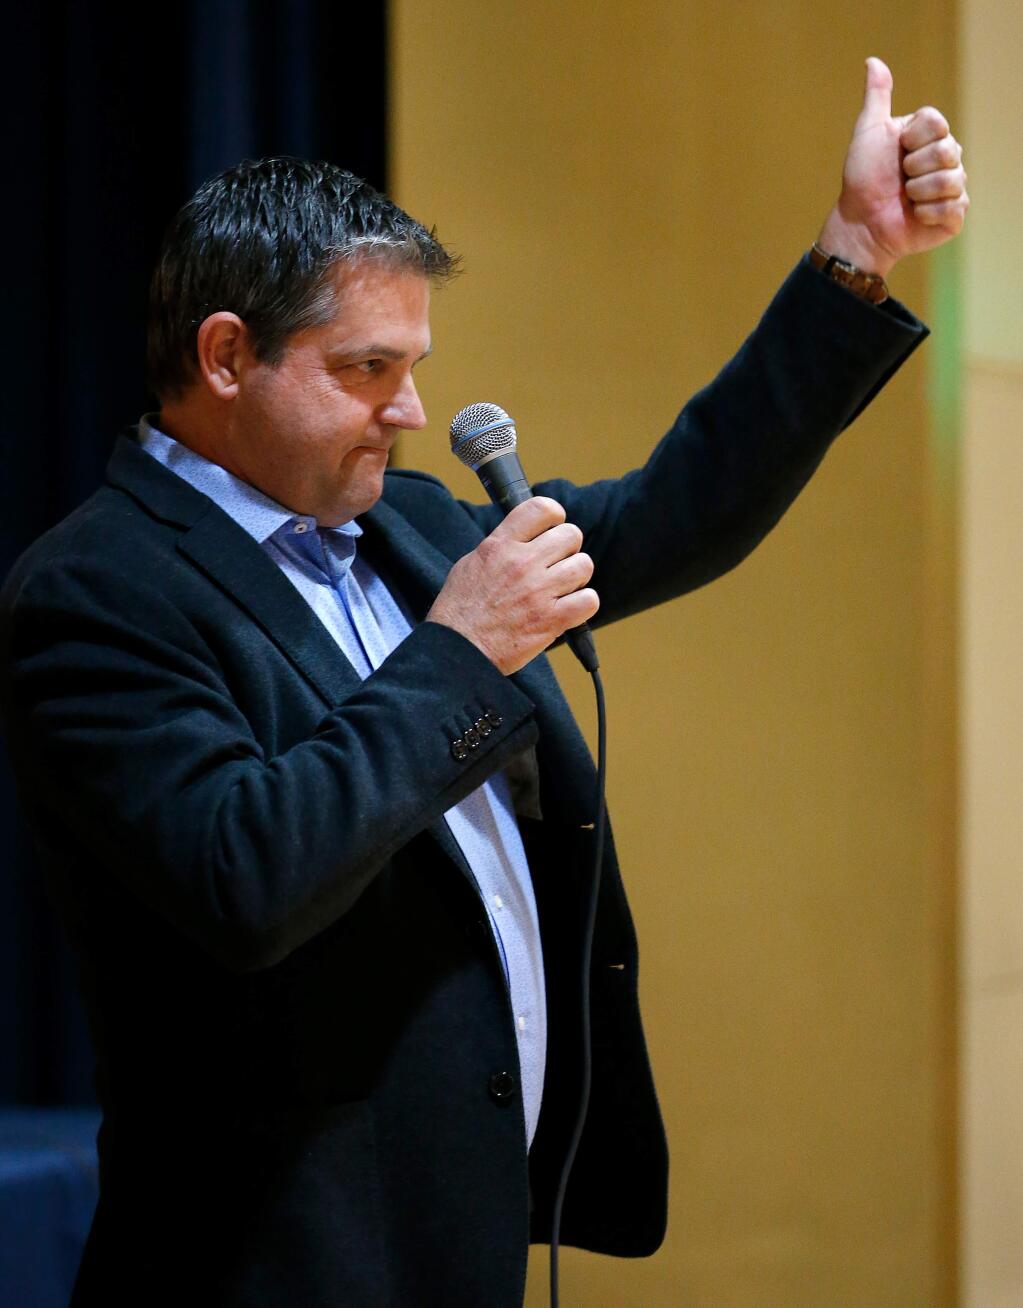 State Assembly member Jim Wood gives a thumbs up as he wraps up speaking during the local Democratic Party's biannual post-election review, hosted by Sonoma County Conservation Action at the Odd Fellows Hall in Santa Rosa on Saturday, Jan. 12, 2019. (Alvin Jornada / The Press Democrat)